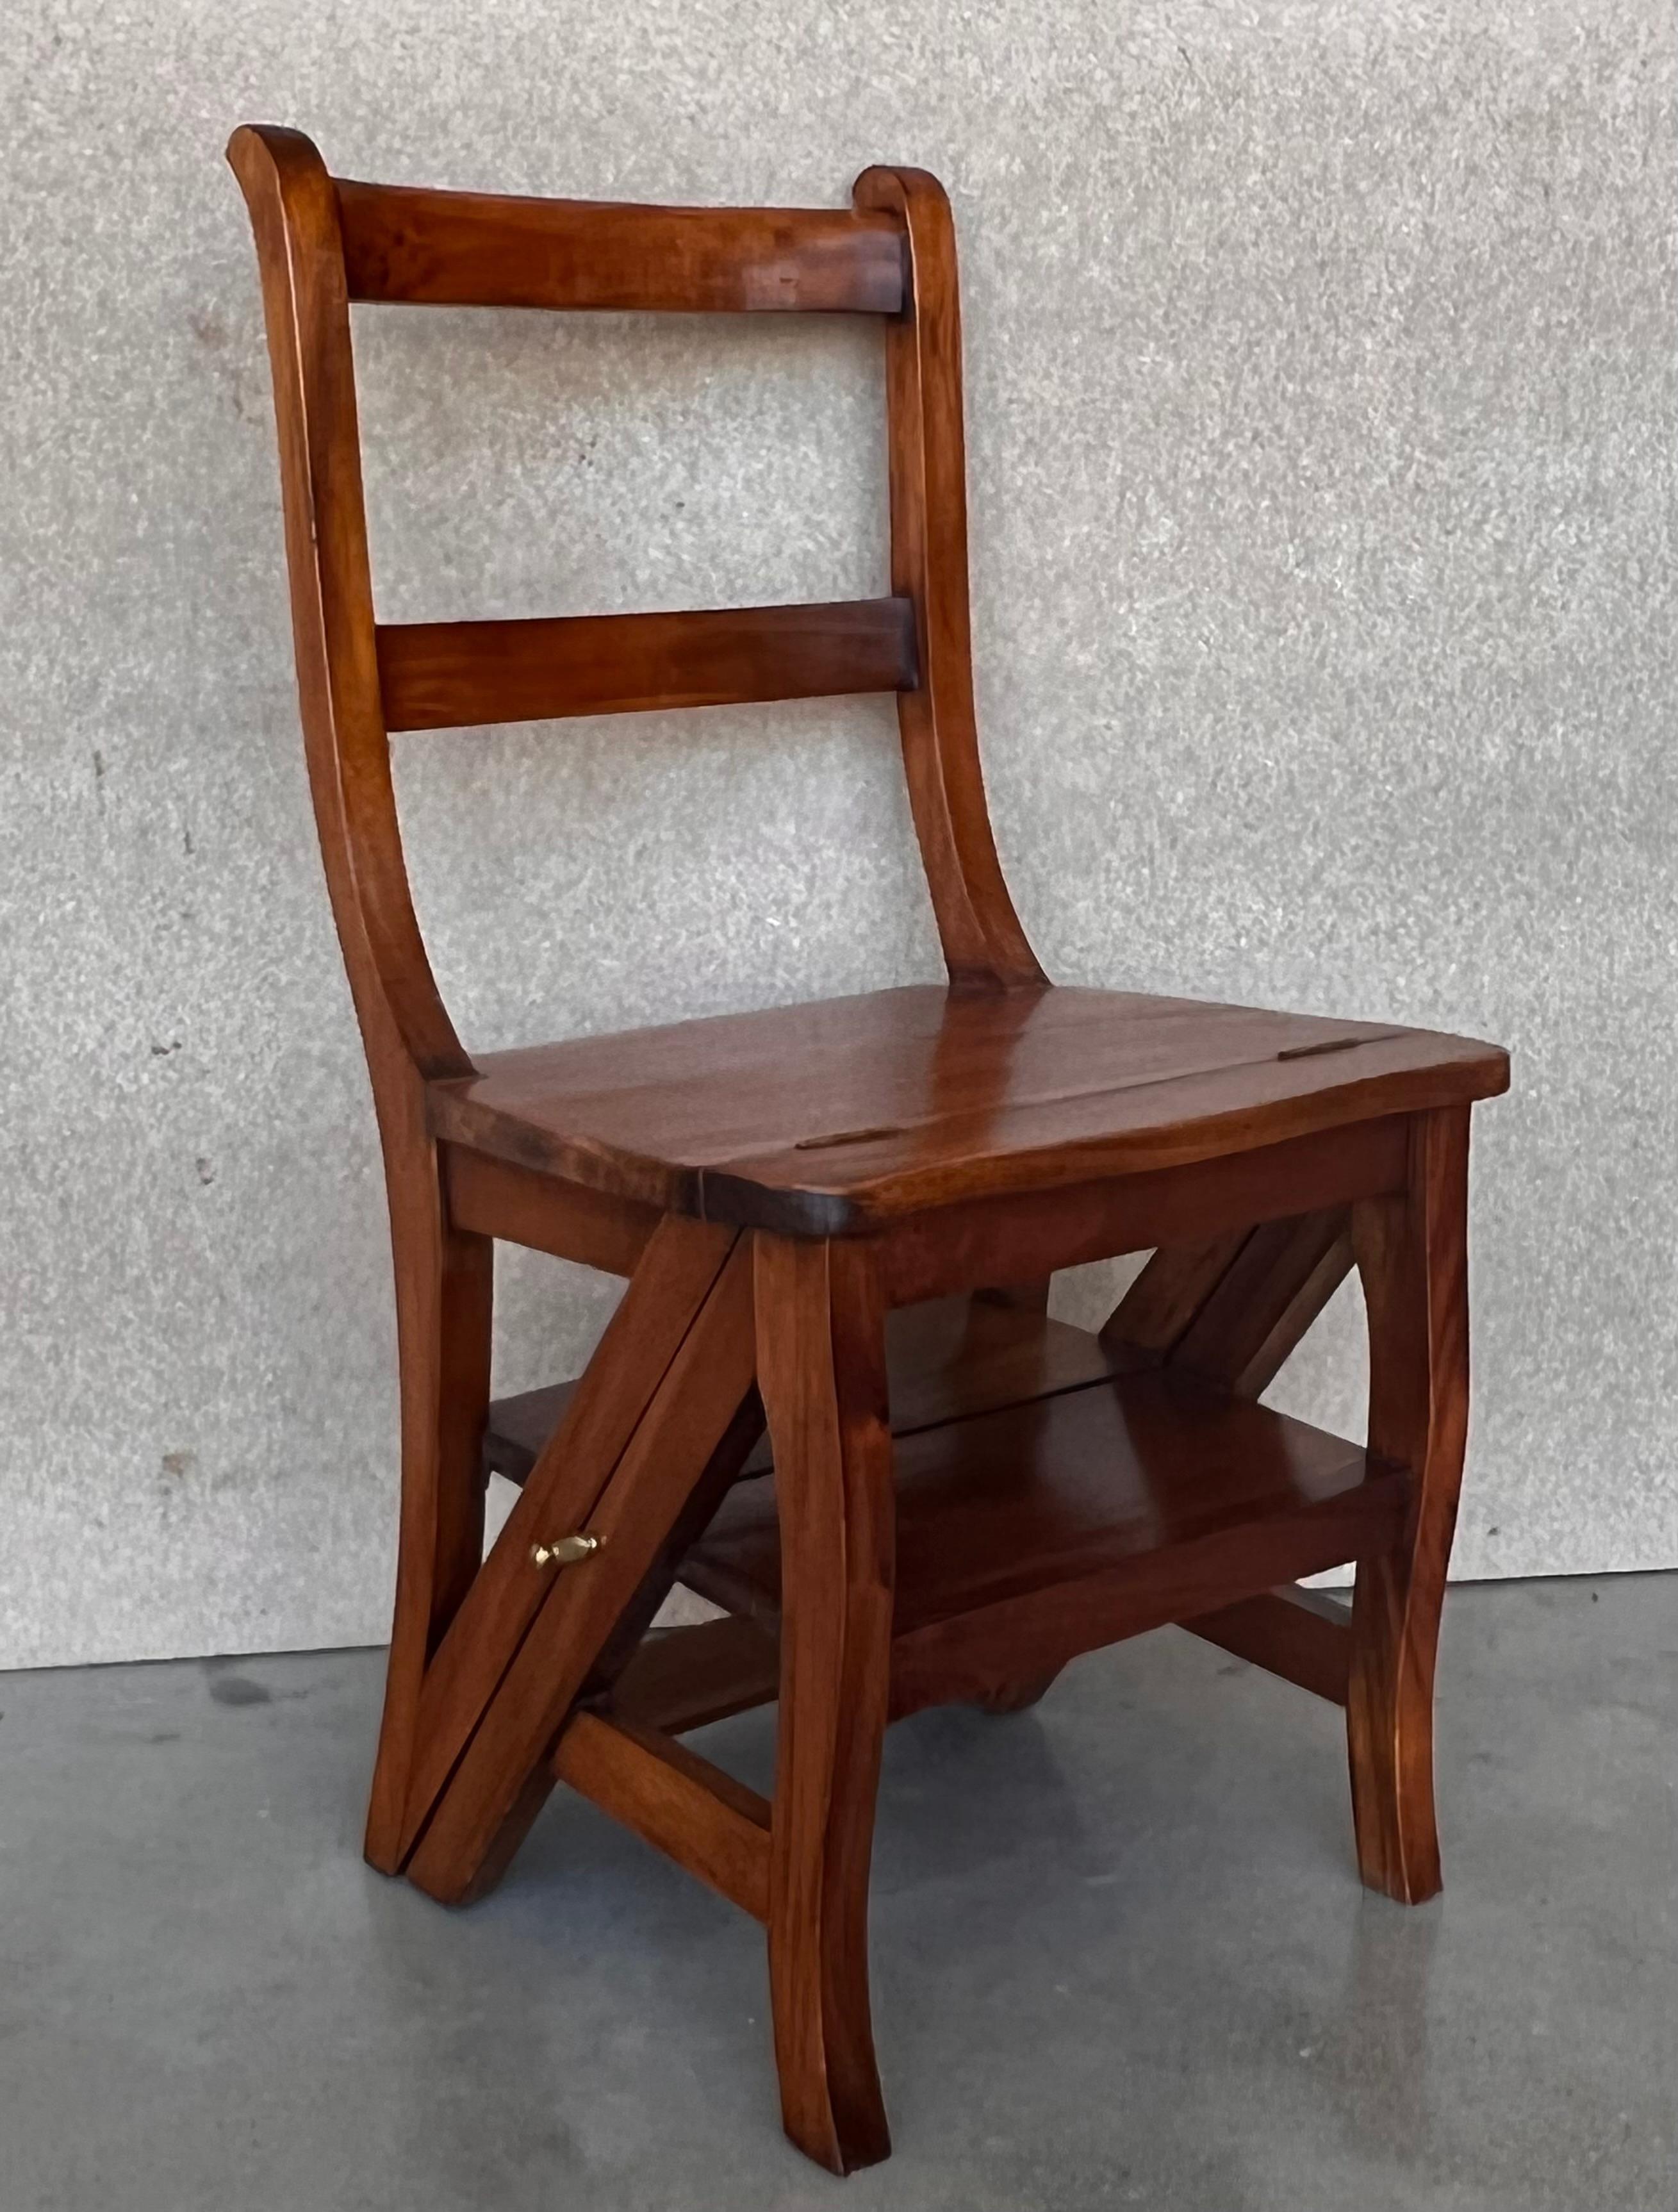 Decorate a library or study with this artisan-made folding step ladder chair. Crafted in Southern France circa 1950, the metamorphic chair features three carved ladders in the back; the double-function piece is hinged so that it can convert into a